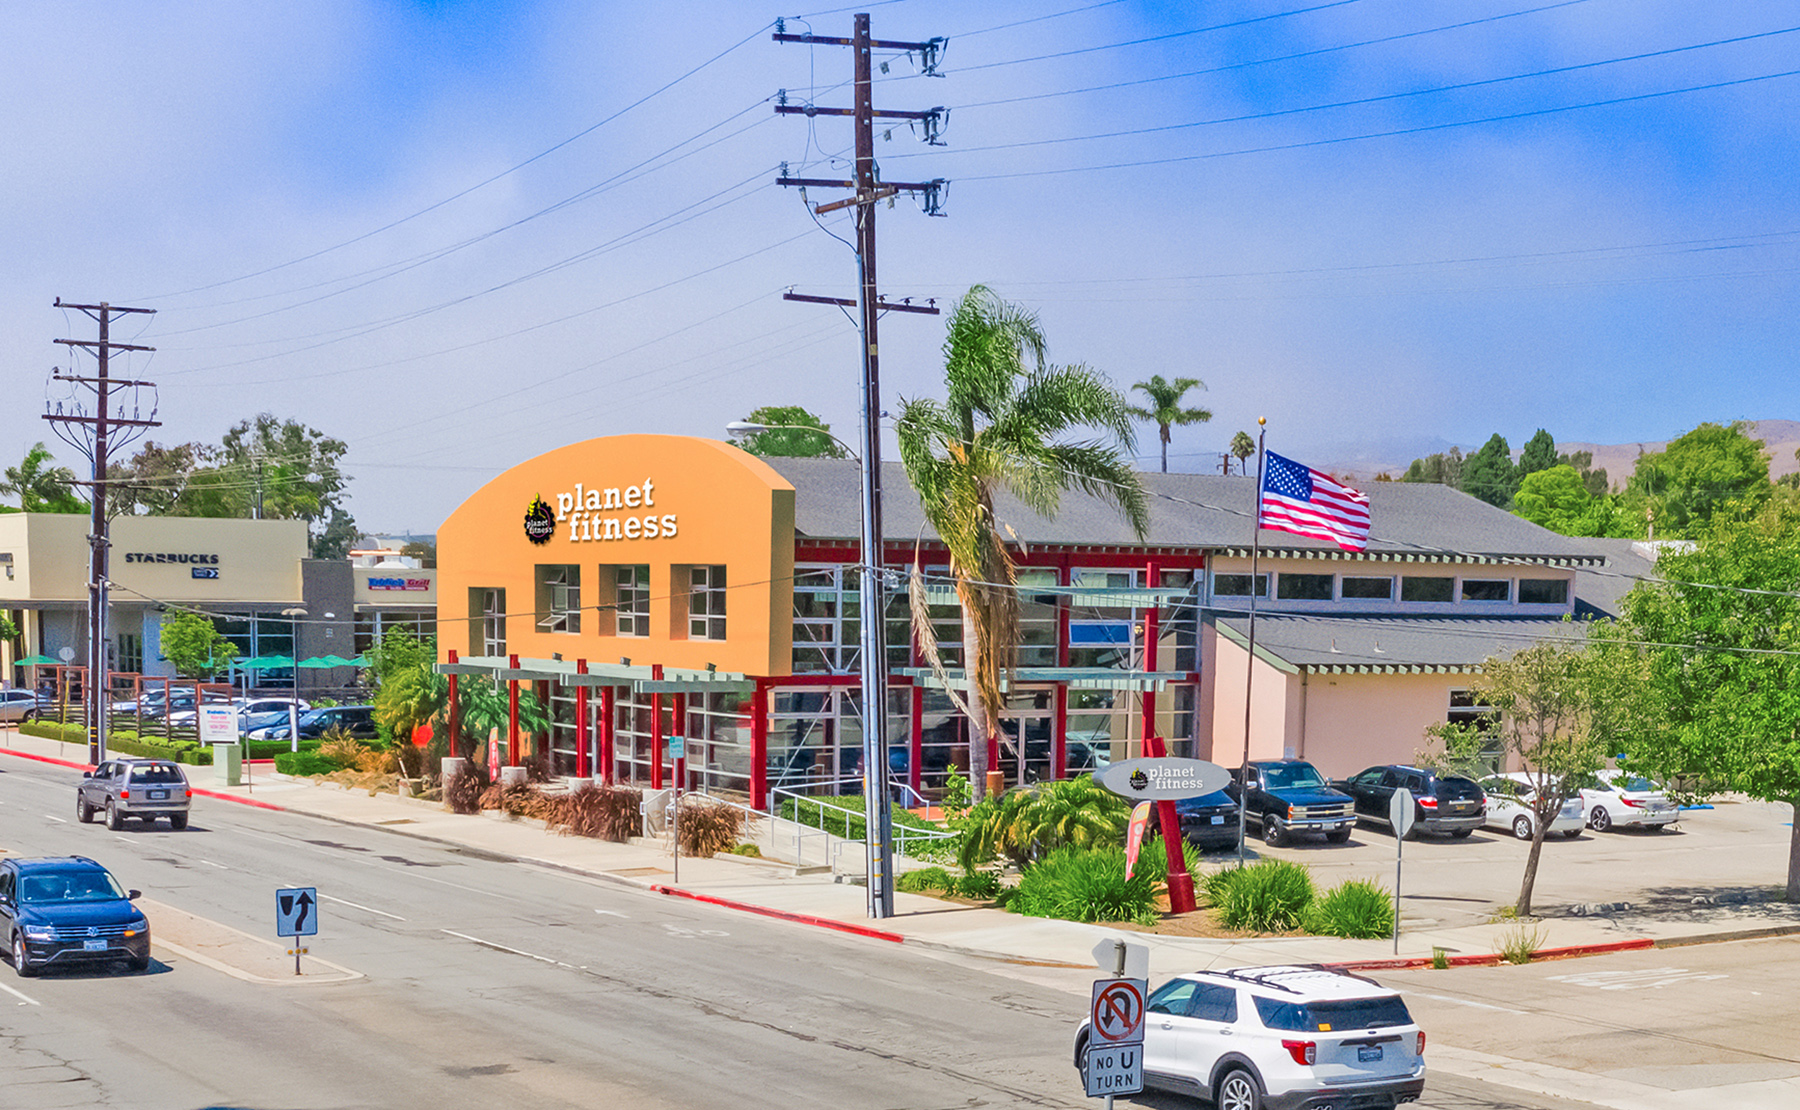 Hanley Investment Group Arranges Sale of New Planet Fitness Adjacent  to Ventura College in Ventura, Calif., for $6.4 Million